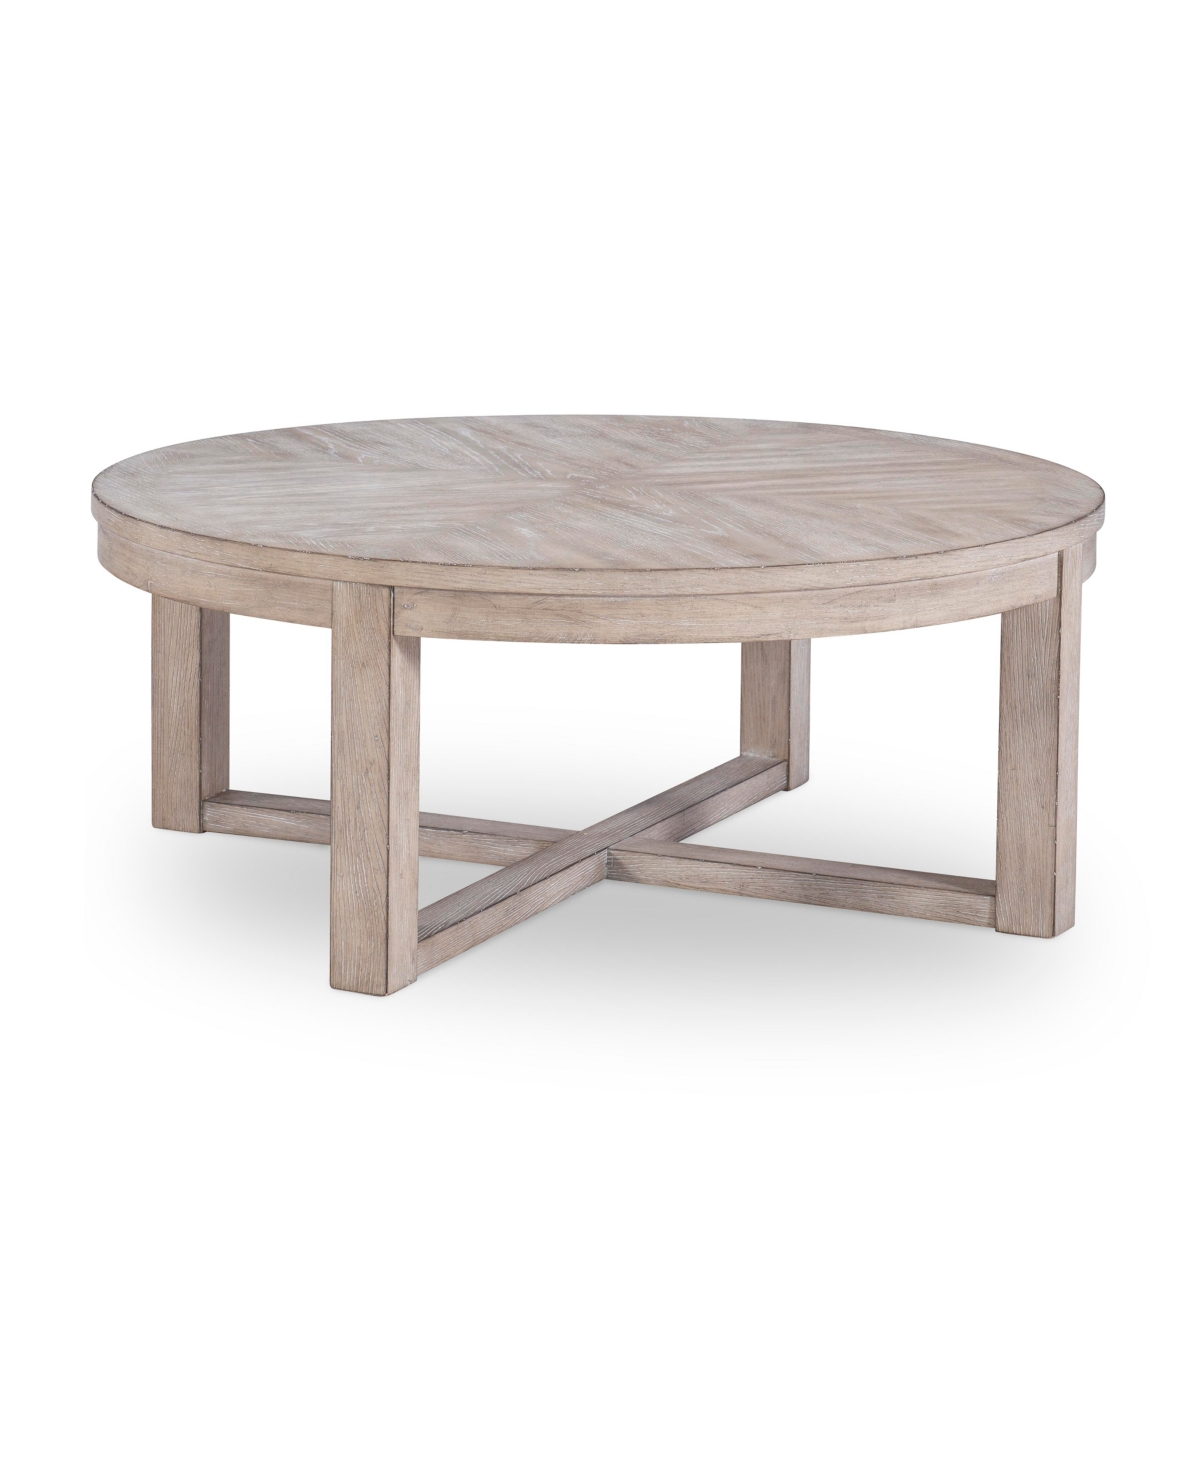 Furniture Westwood Round Cocktail Table In Weathered Oak